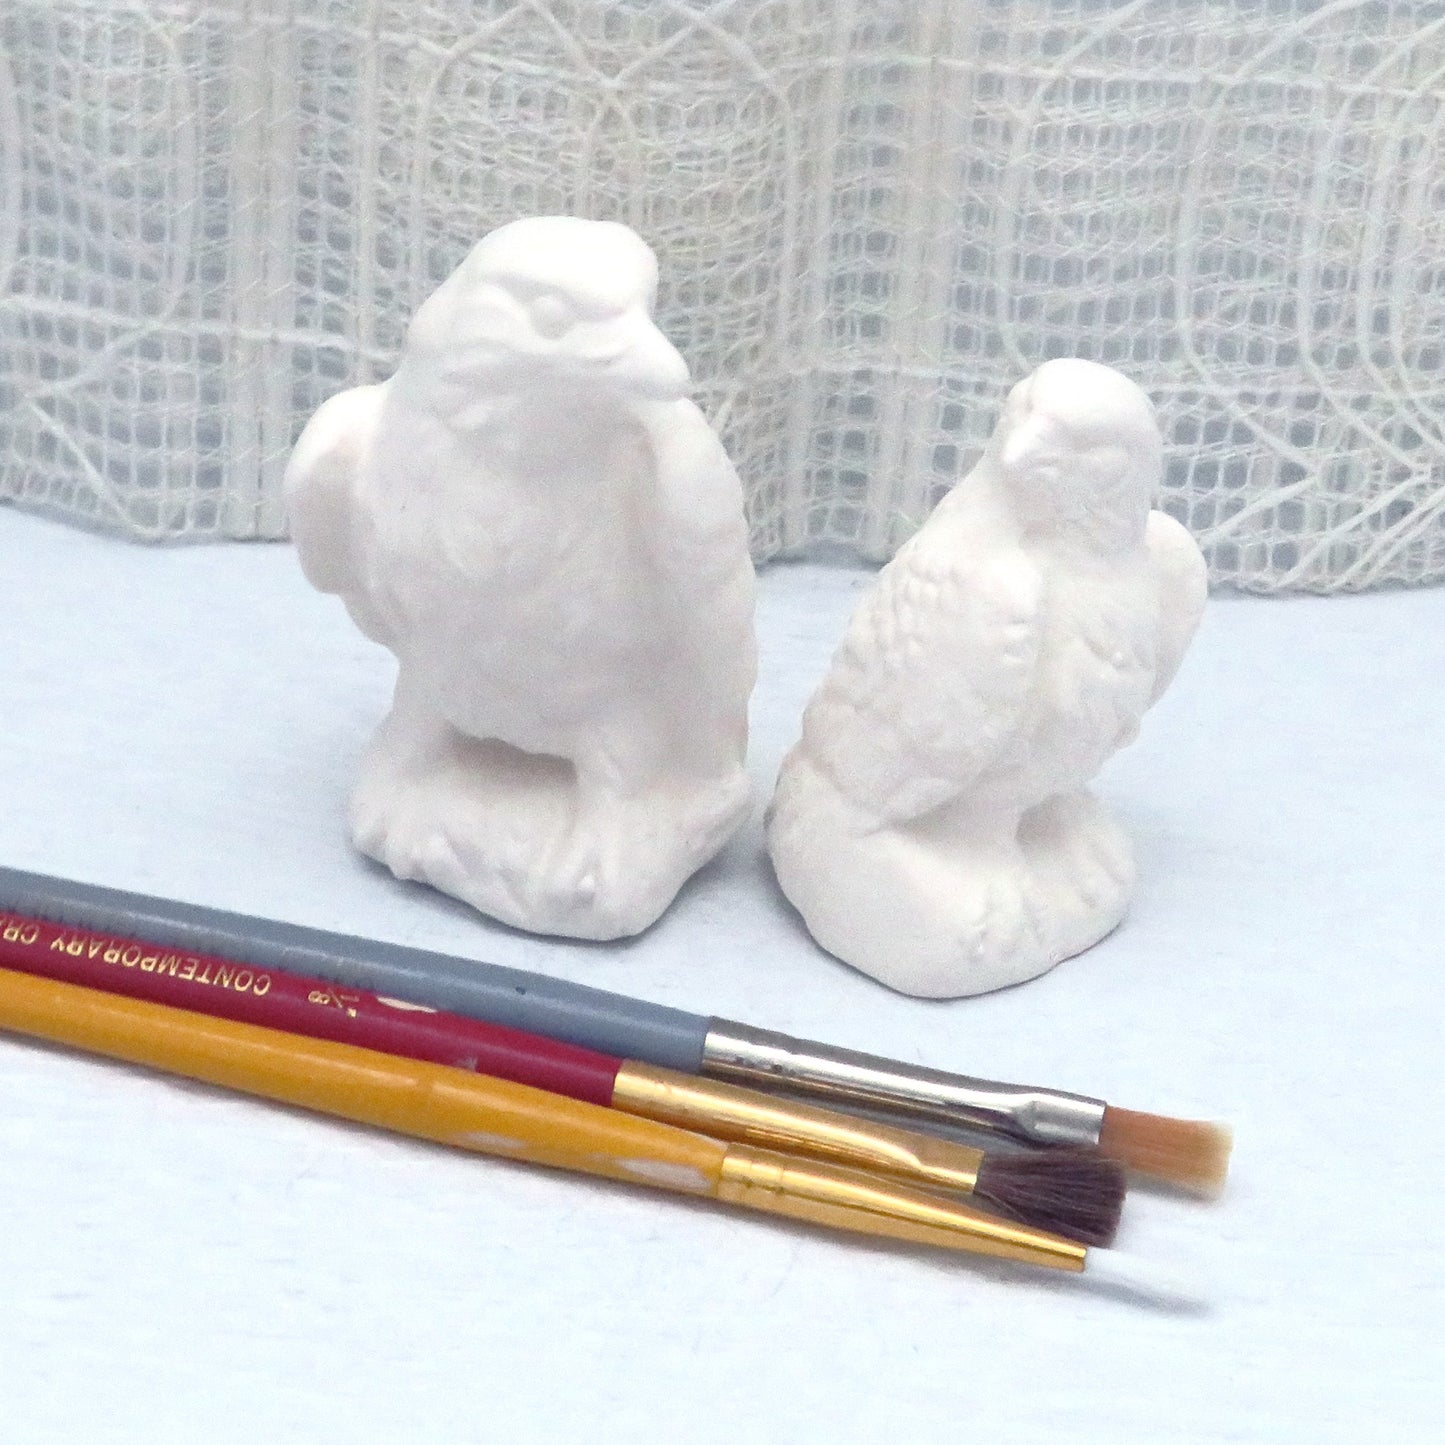 2 small unpainted ceramic eagle figurines on a pale blue table with an ecru lacy curtain.  There are 3 paintbrushes in front of the eagle figurines.  This is a front view of the eagles.